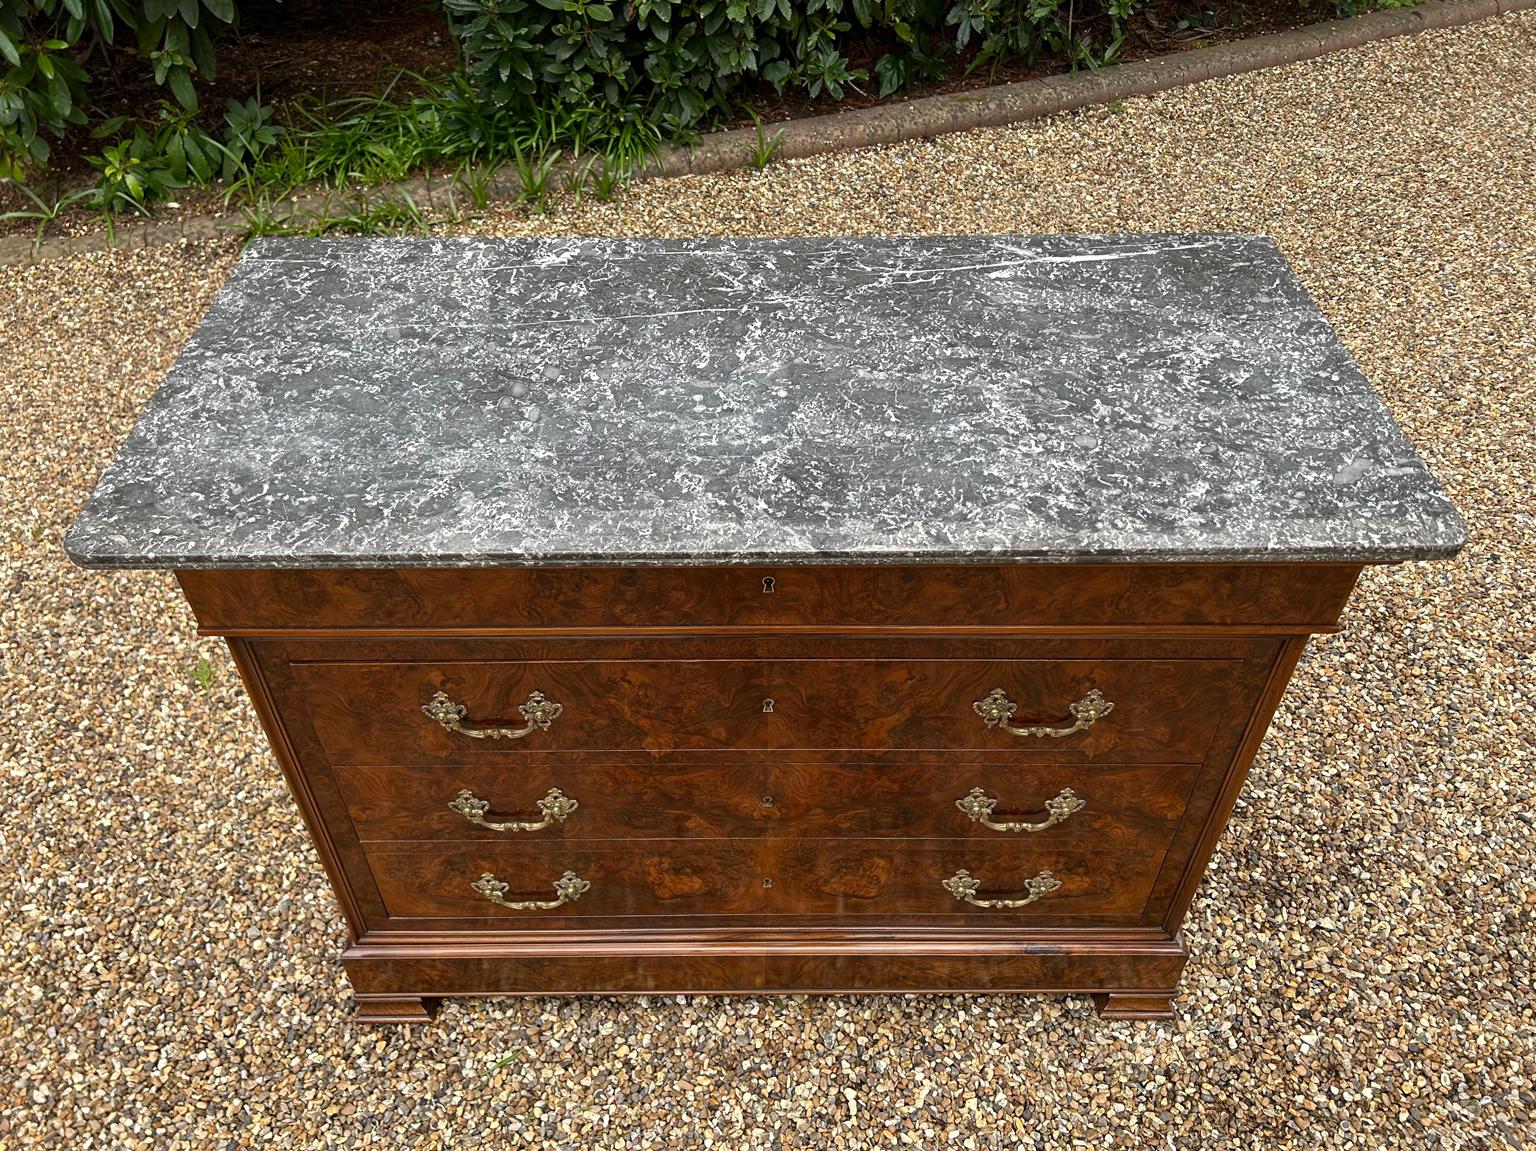 19th Century French Burr Walnut Commode / Chest of Drawers with Marble Top 1